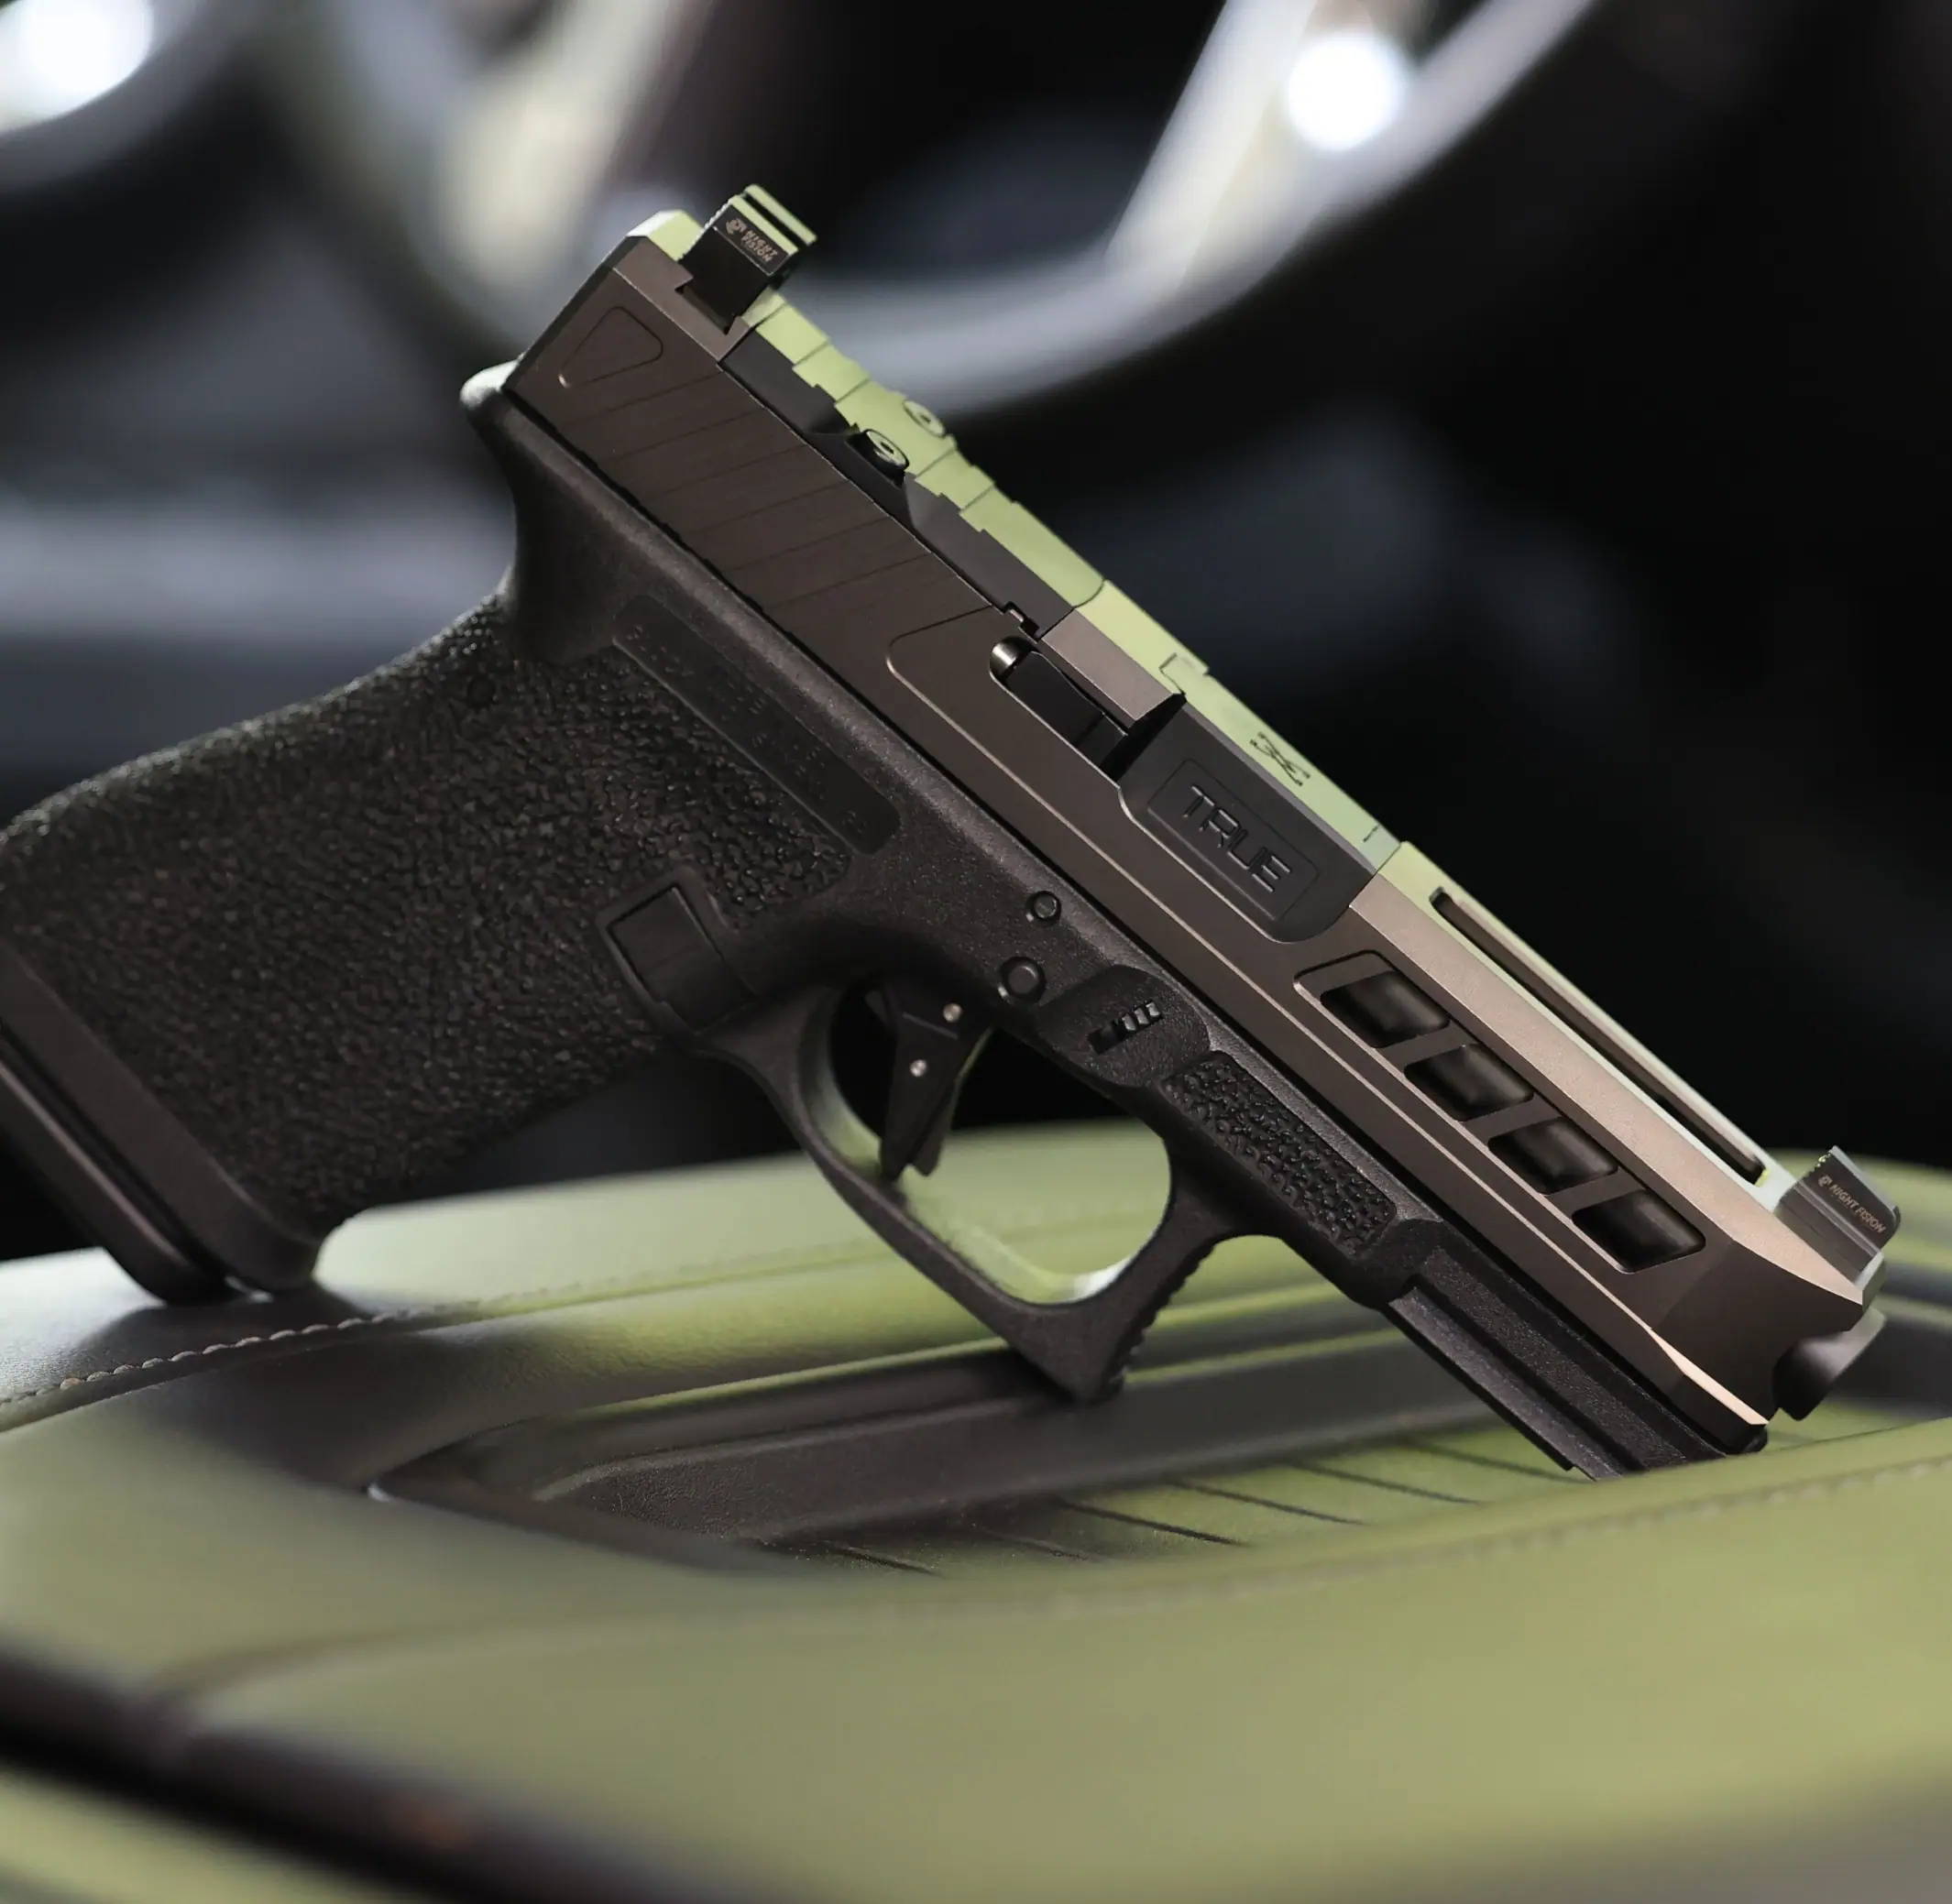 Glock 19 with grey True Precision slide and barrel, sitting in the center console of a car.